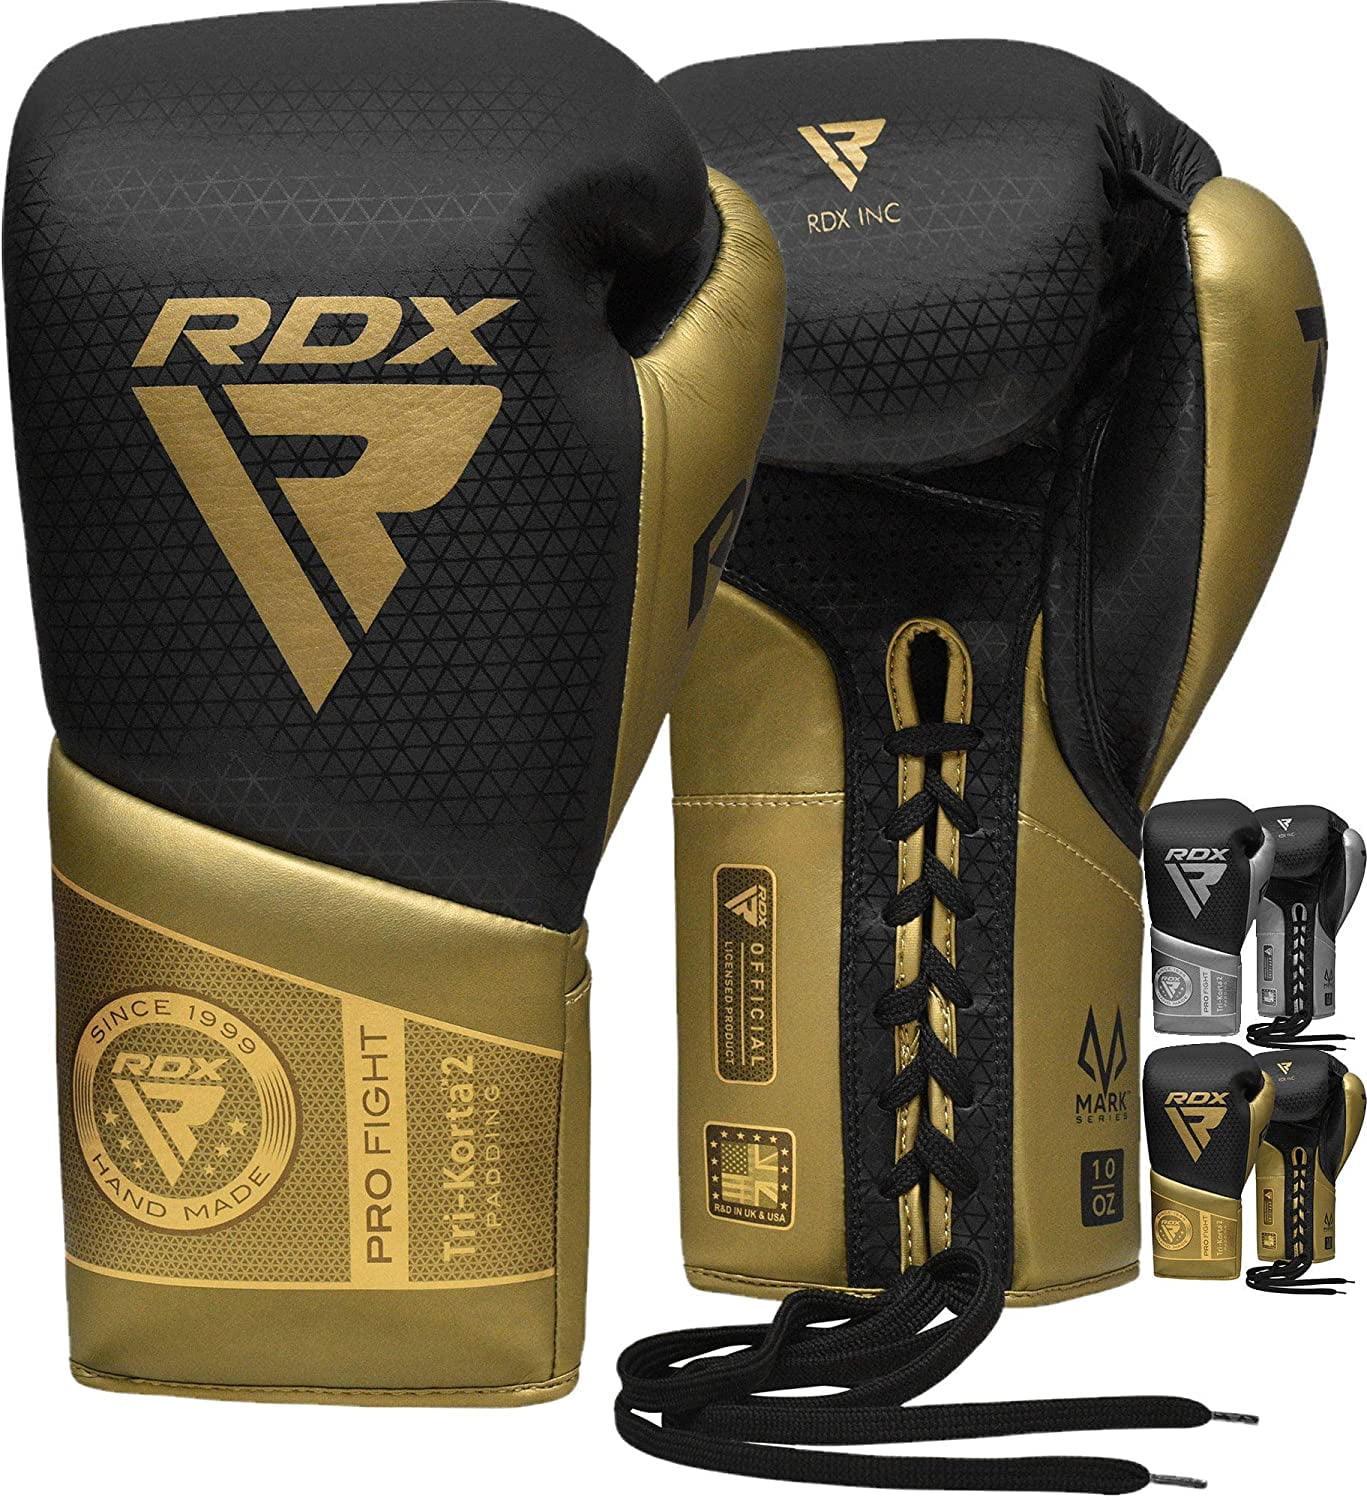 Rex Special Black And Golden Cowhide Leather Boxing Gloves For Pro Fighters 